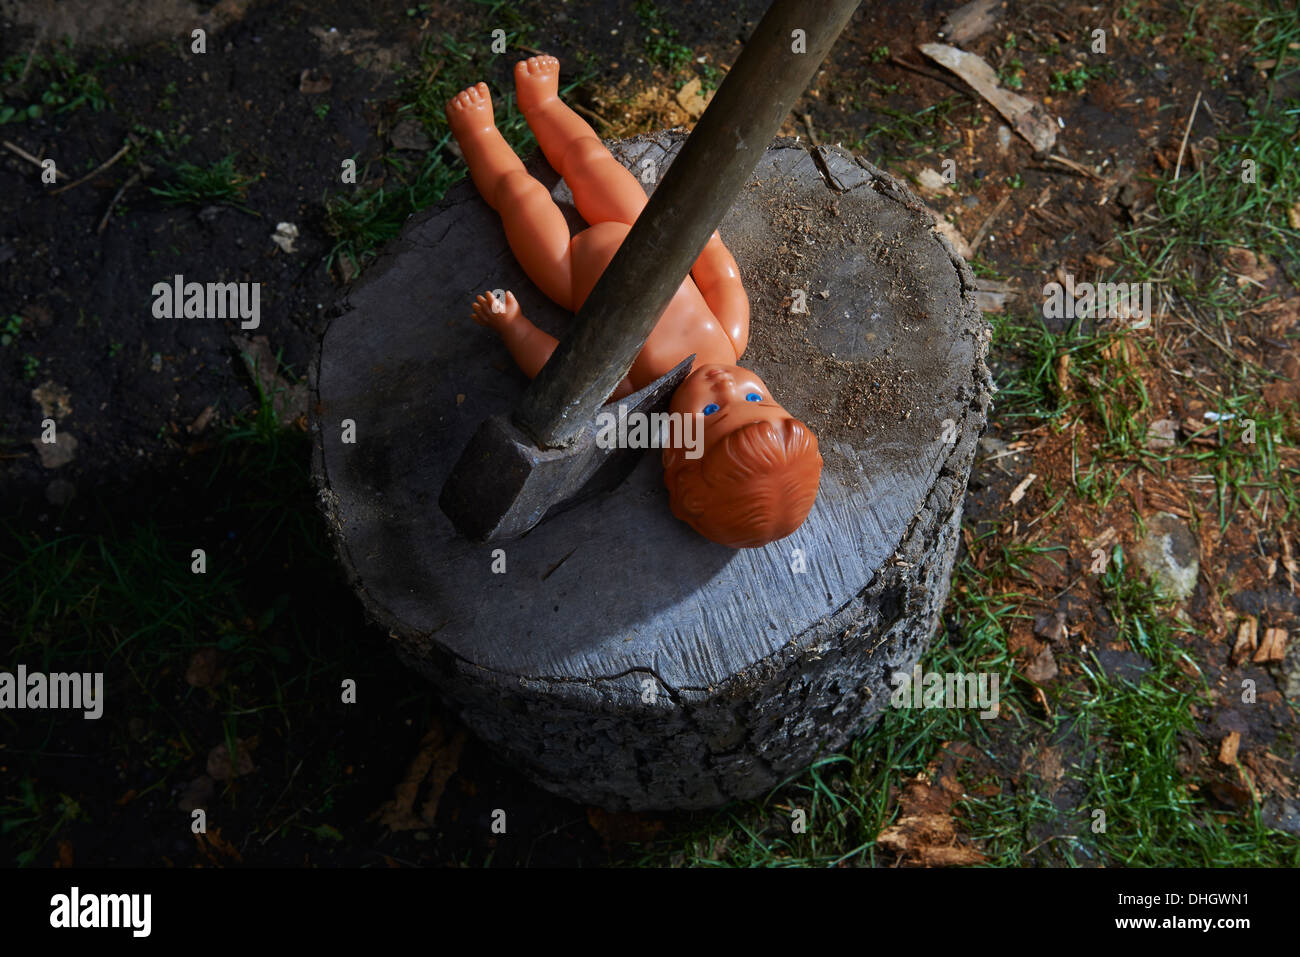 Execution - murder of child toy plastic baby doll with an ax Stock Photo